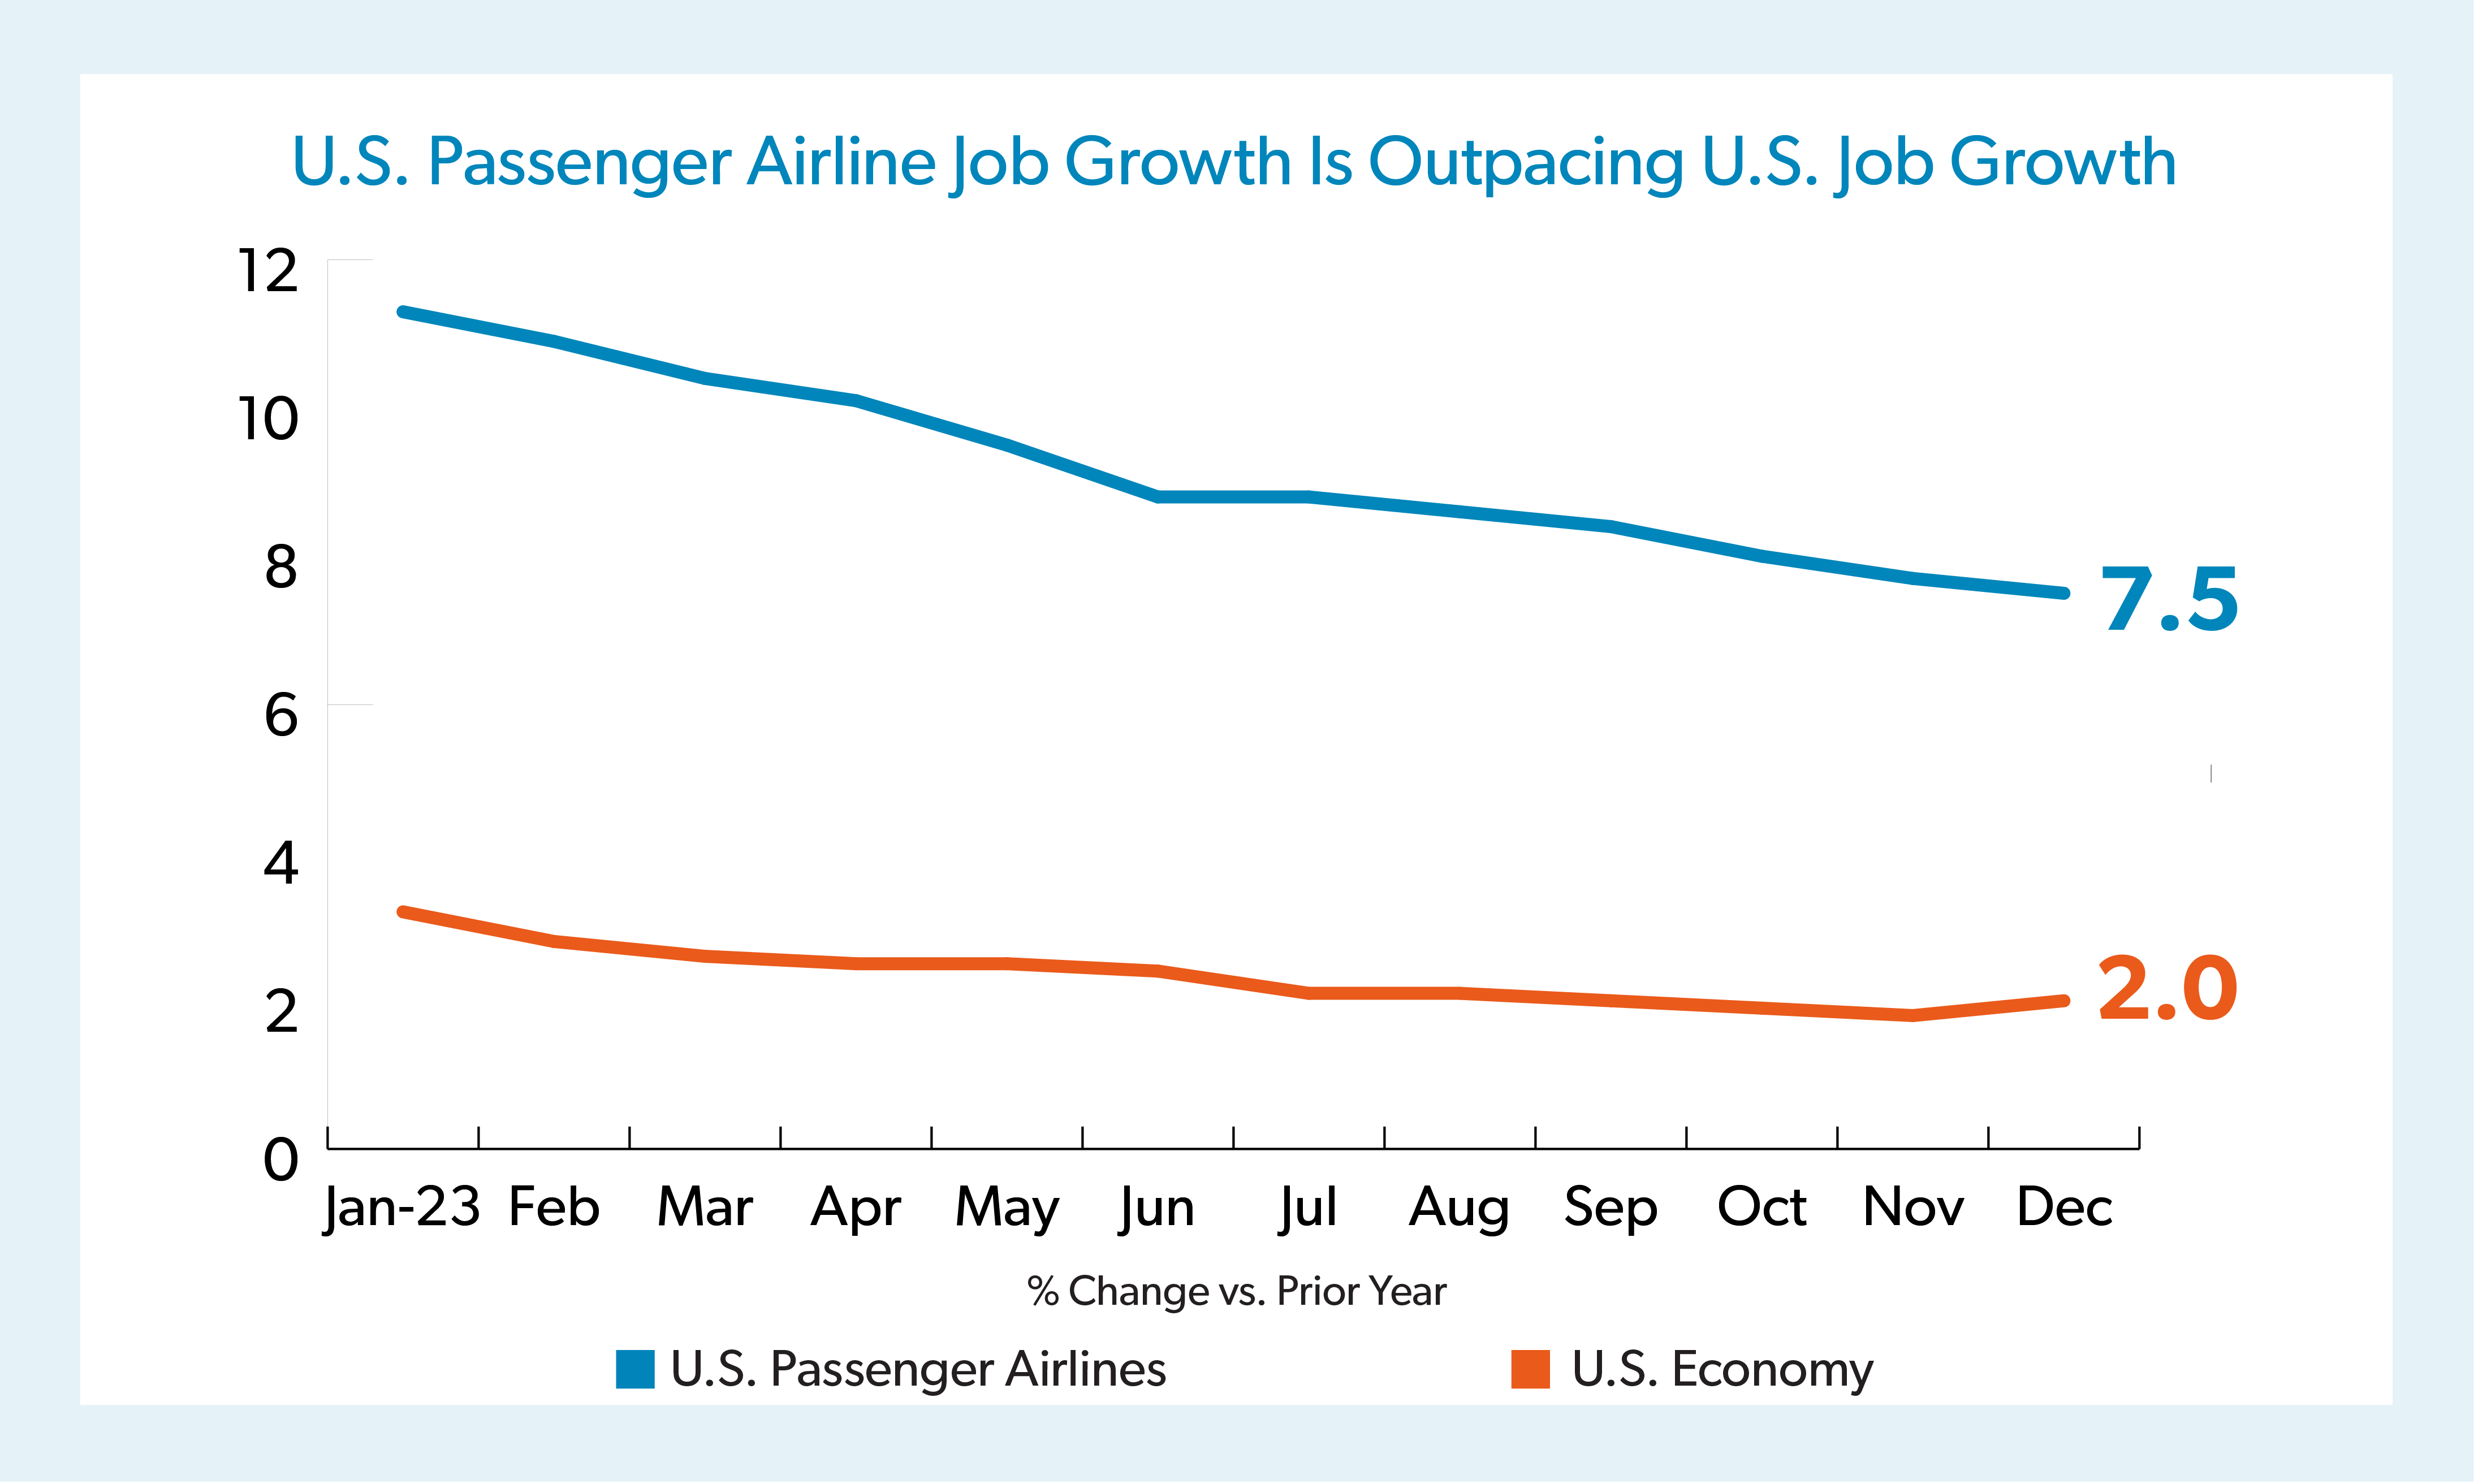 U.S. Passenger Airline Job Growth is Outpacing U.S. Job Growth